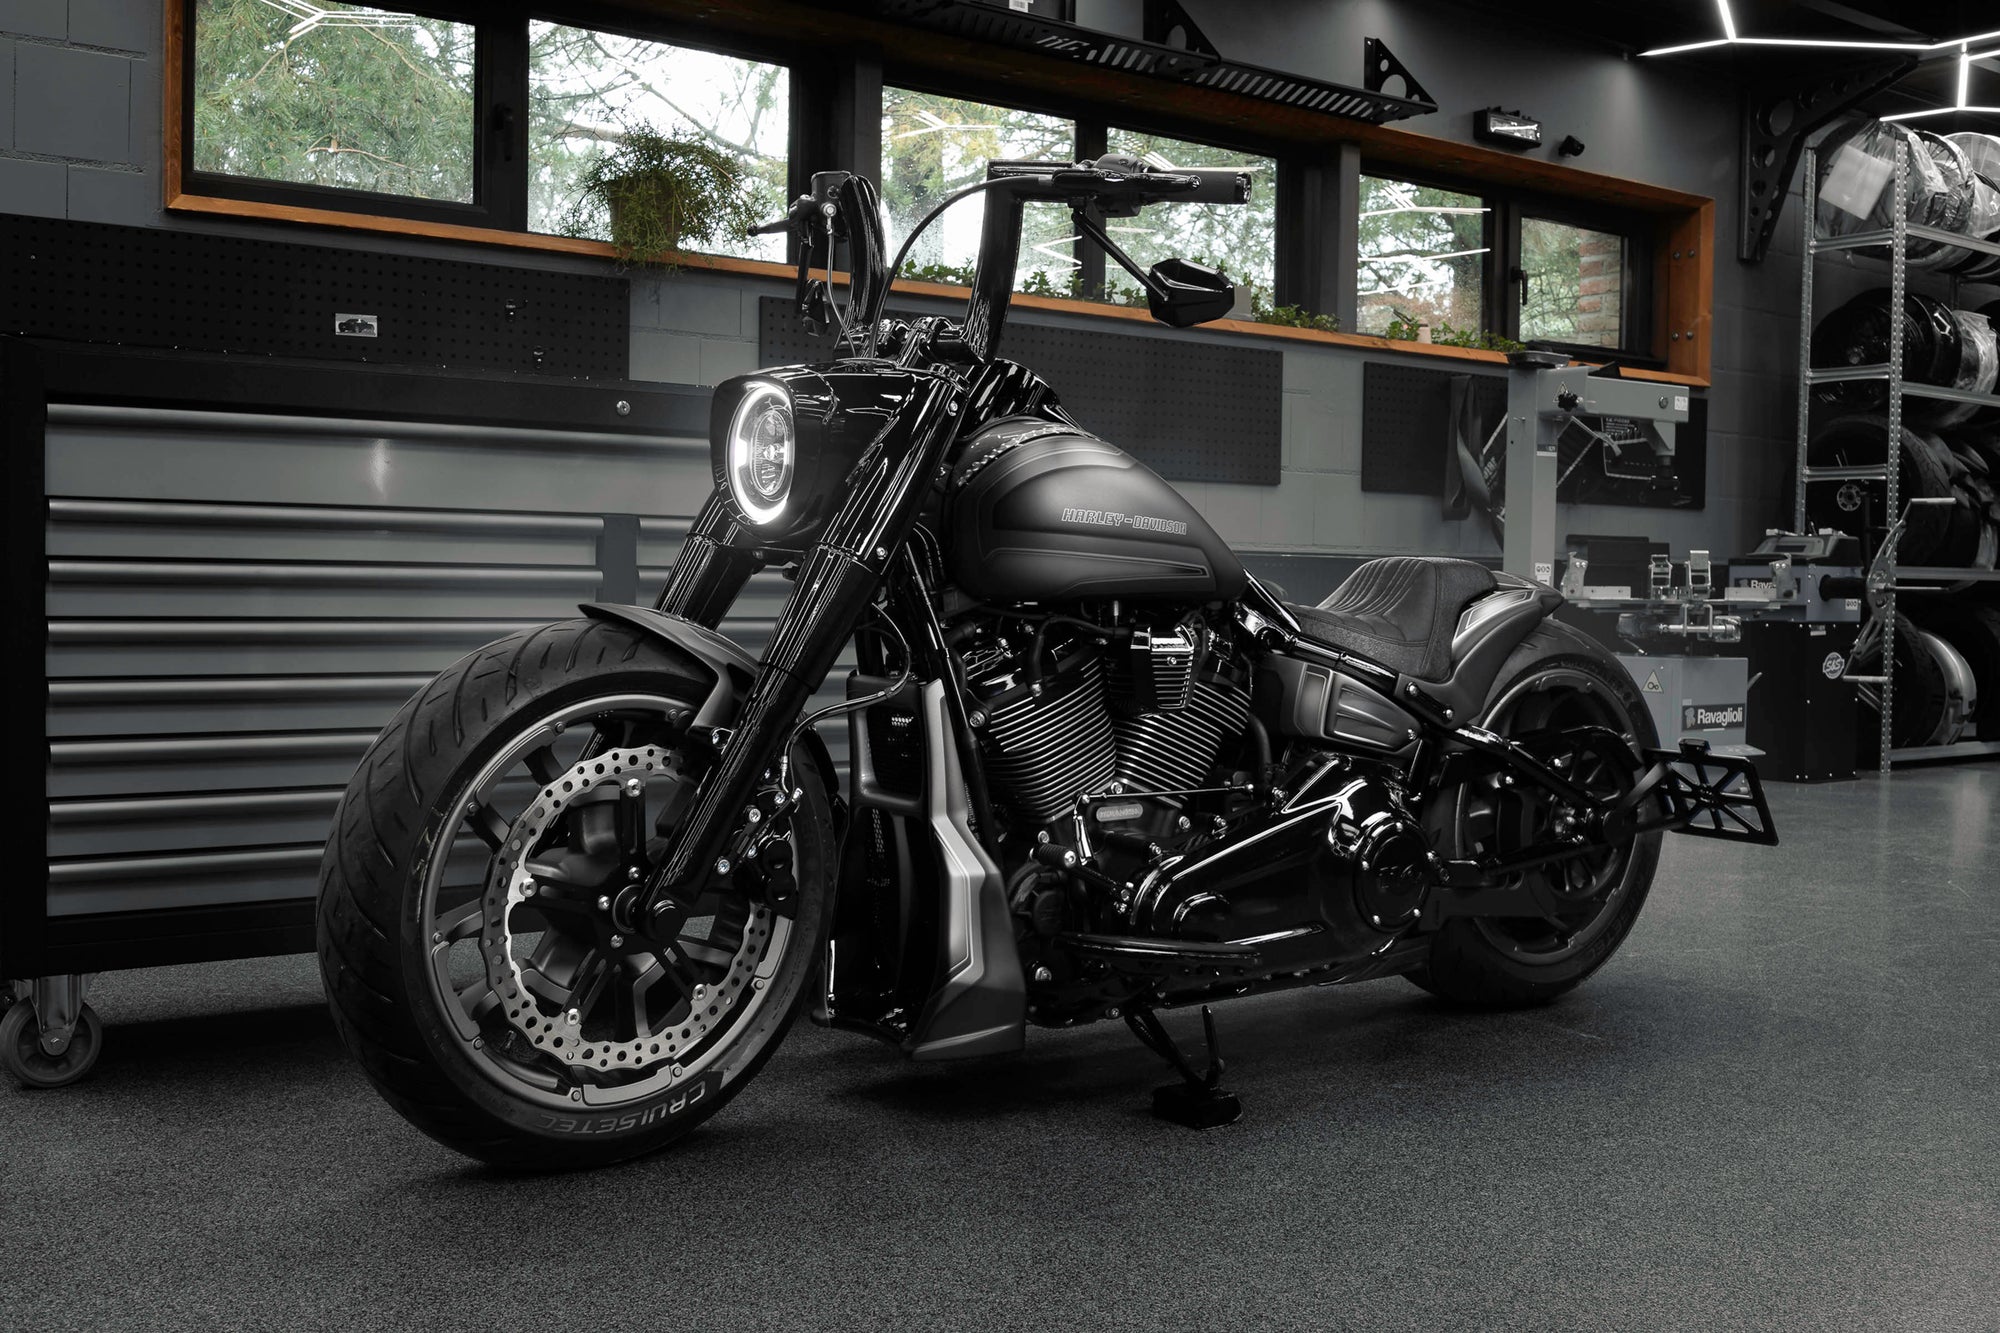 Modified Harley Davidson Fat Boy motorcycle with Killer Custom parts from the side in a modern bike shop with some windows in the background